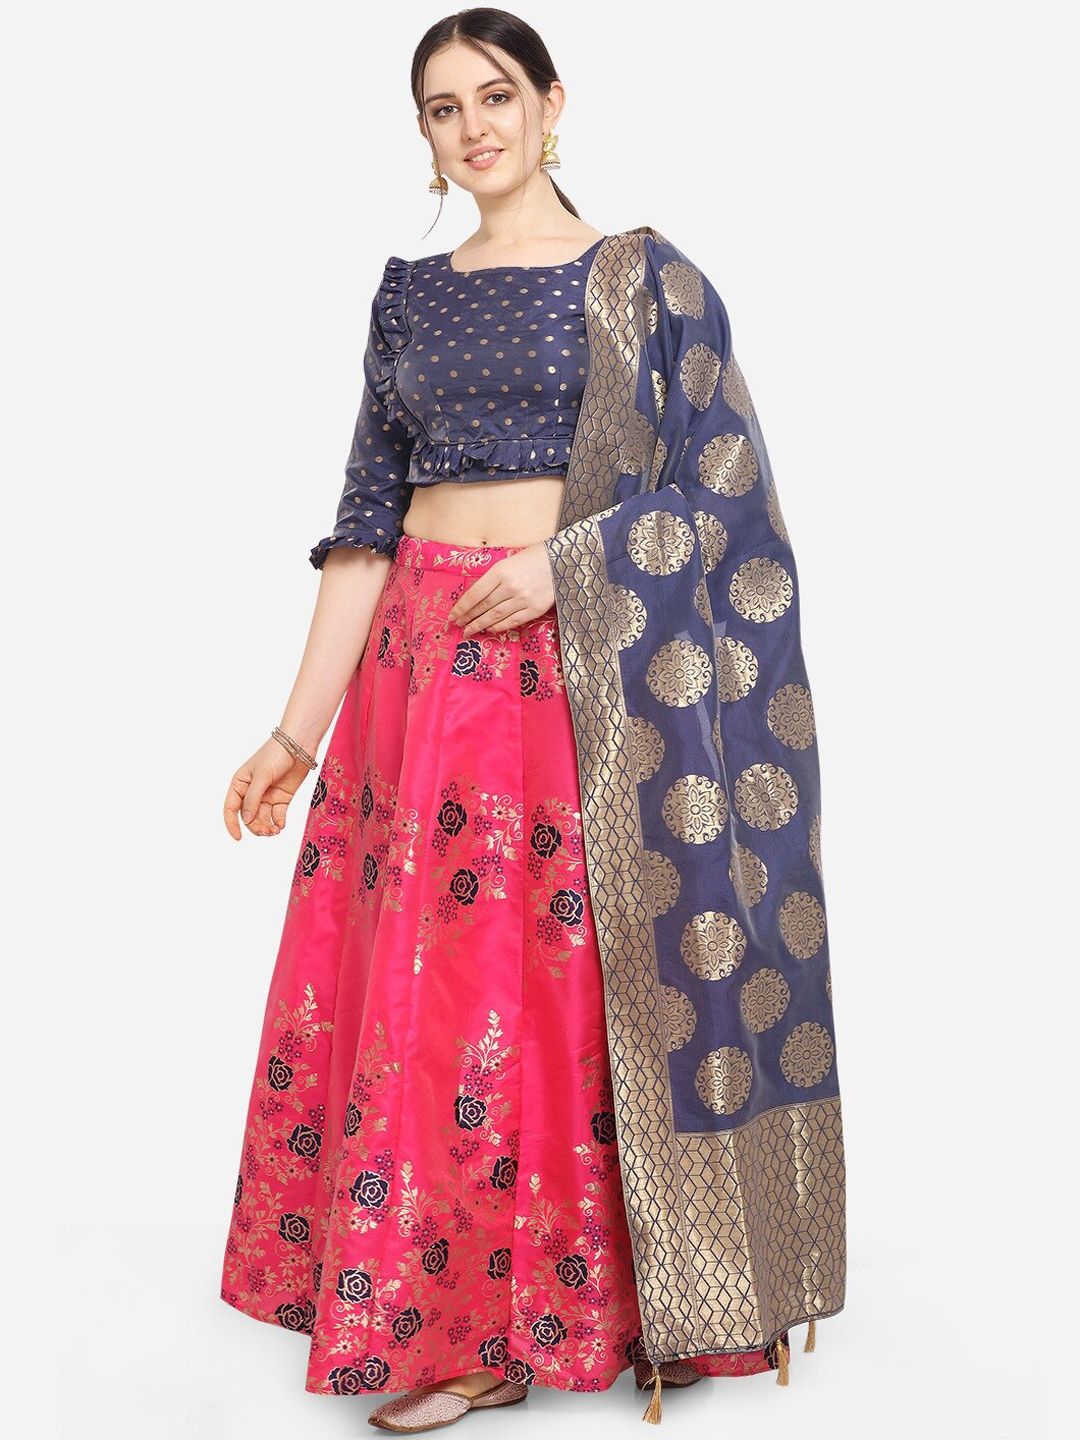 PURVAJA Women Pink & Navy Blue Printed Semi-Stitched Lehenga & Unstitched Blouse with Dupatta Price in India